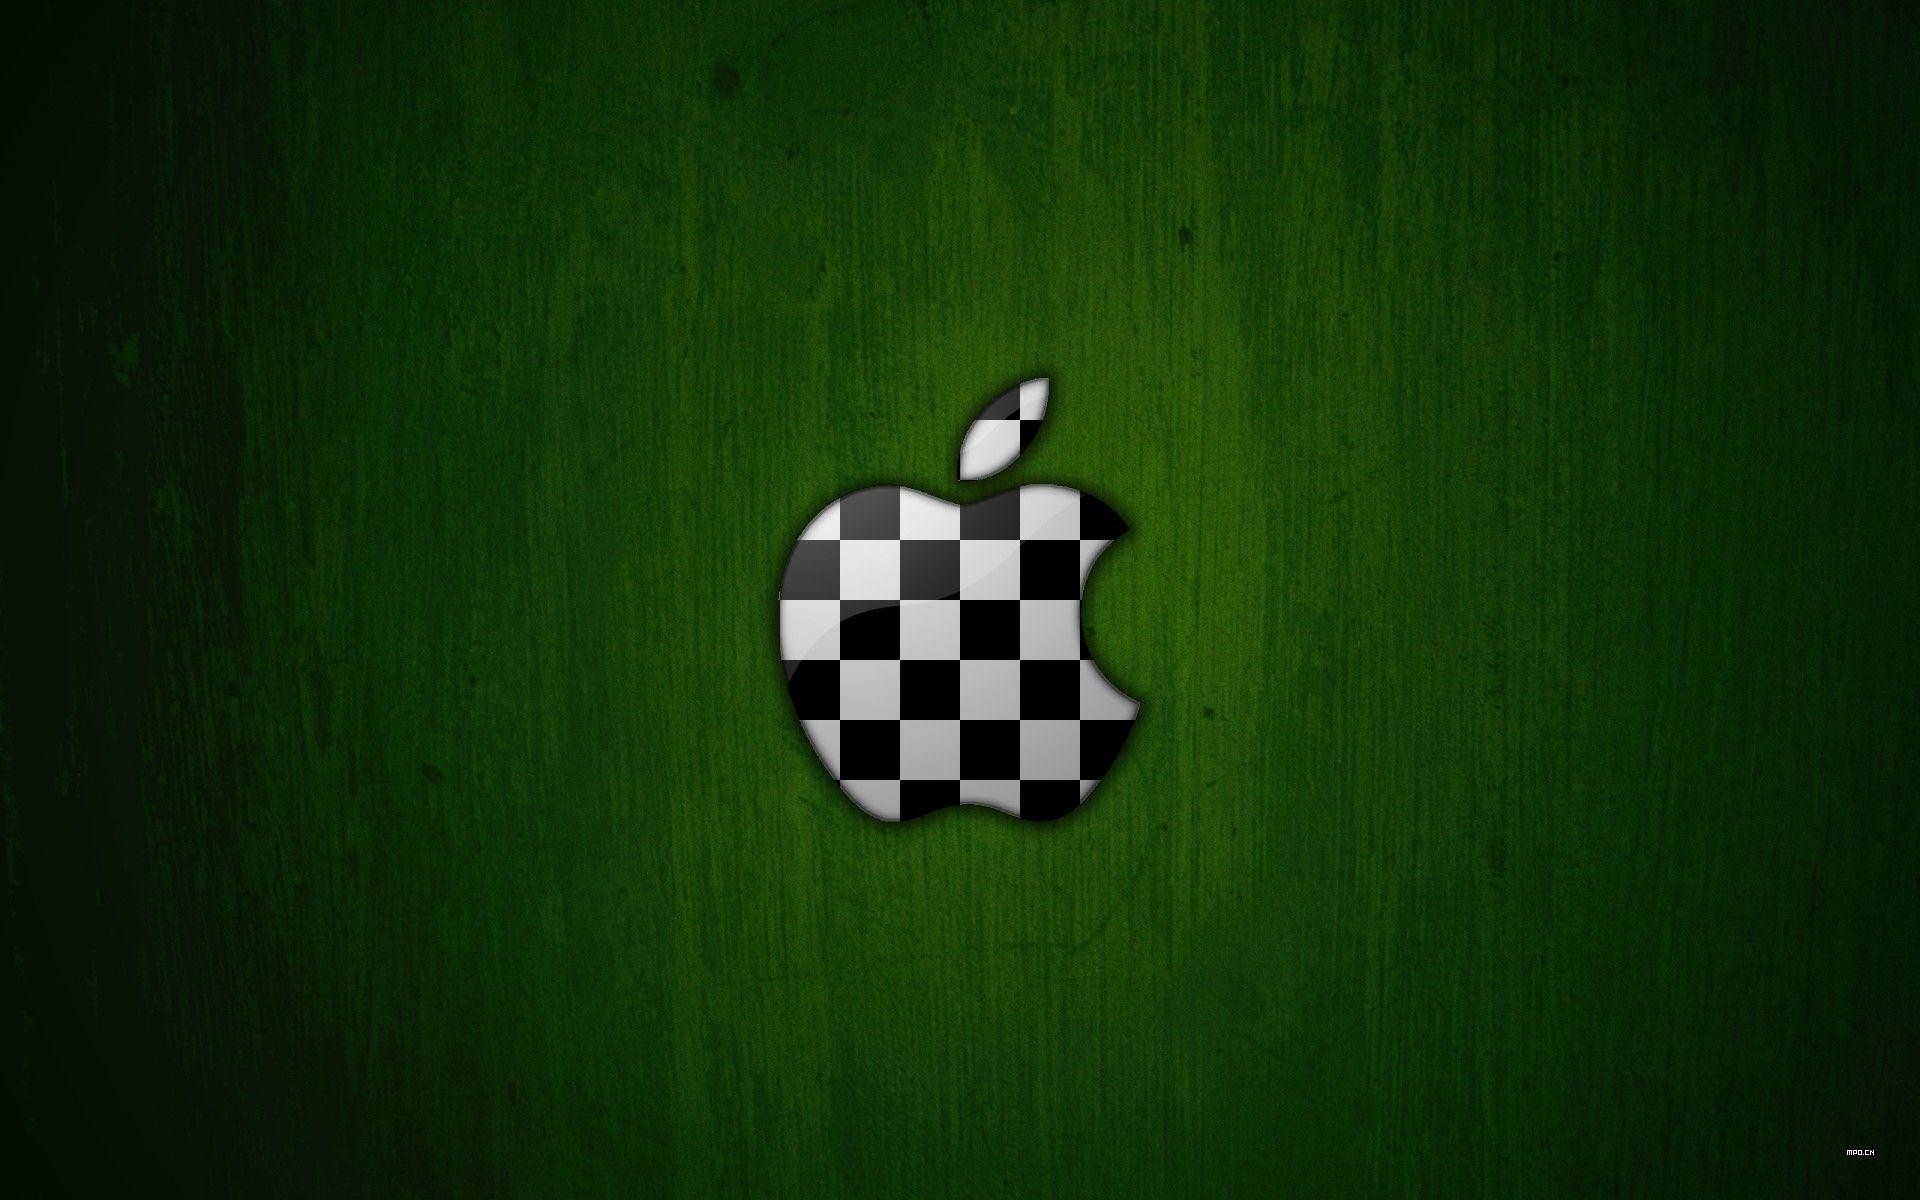 Cool Apple Logo Wallpaper (70+ pictures)